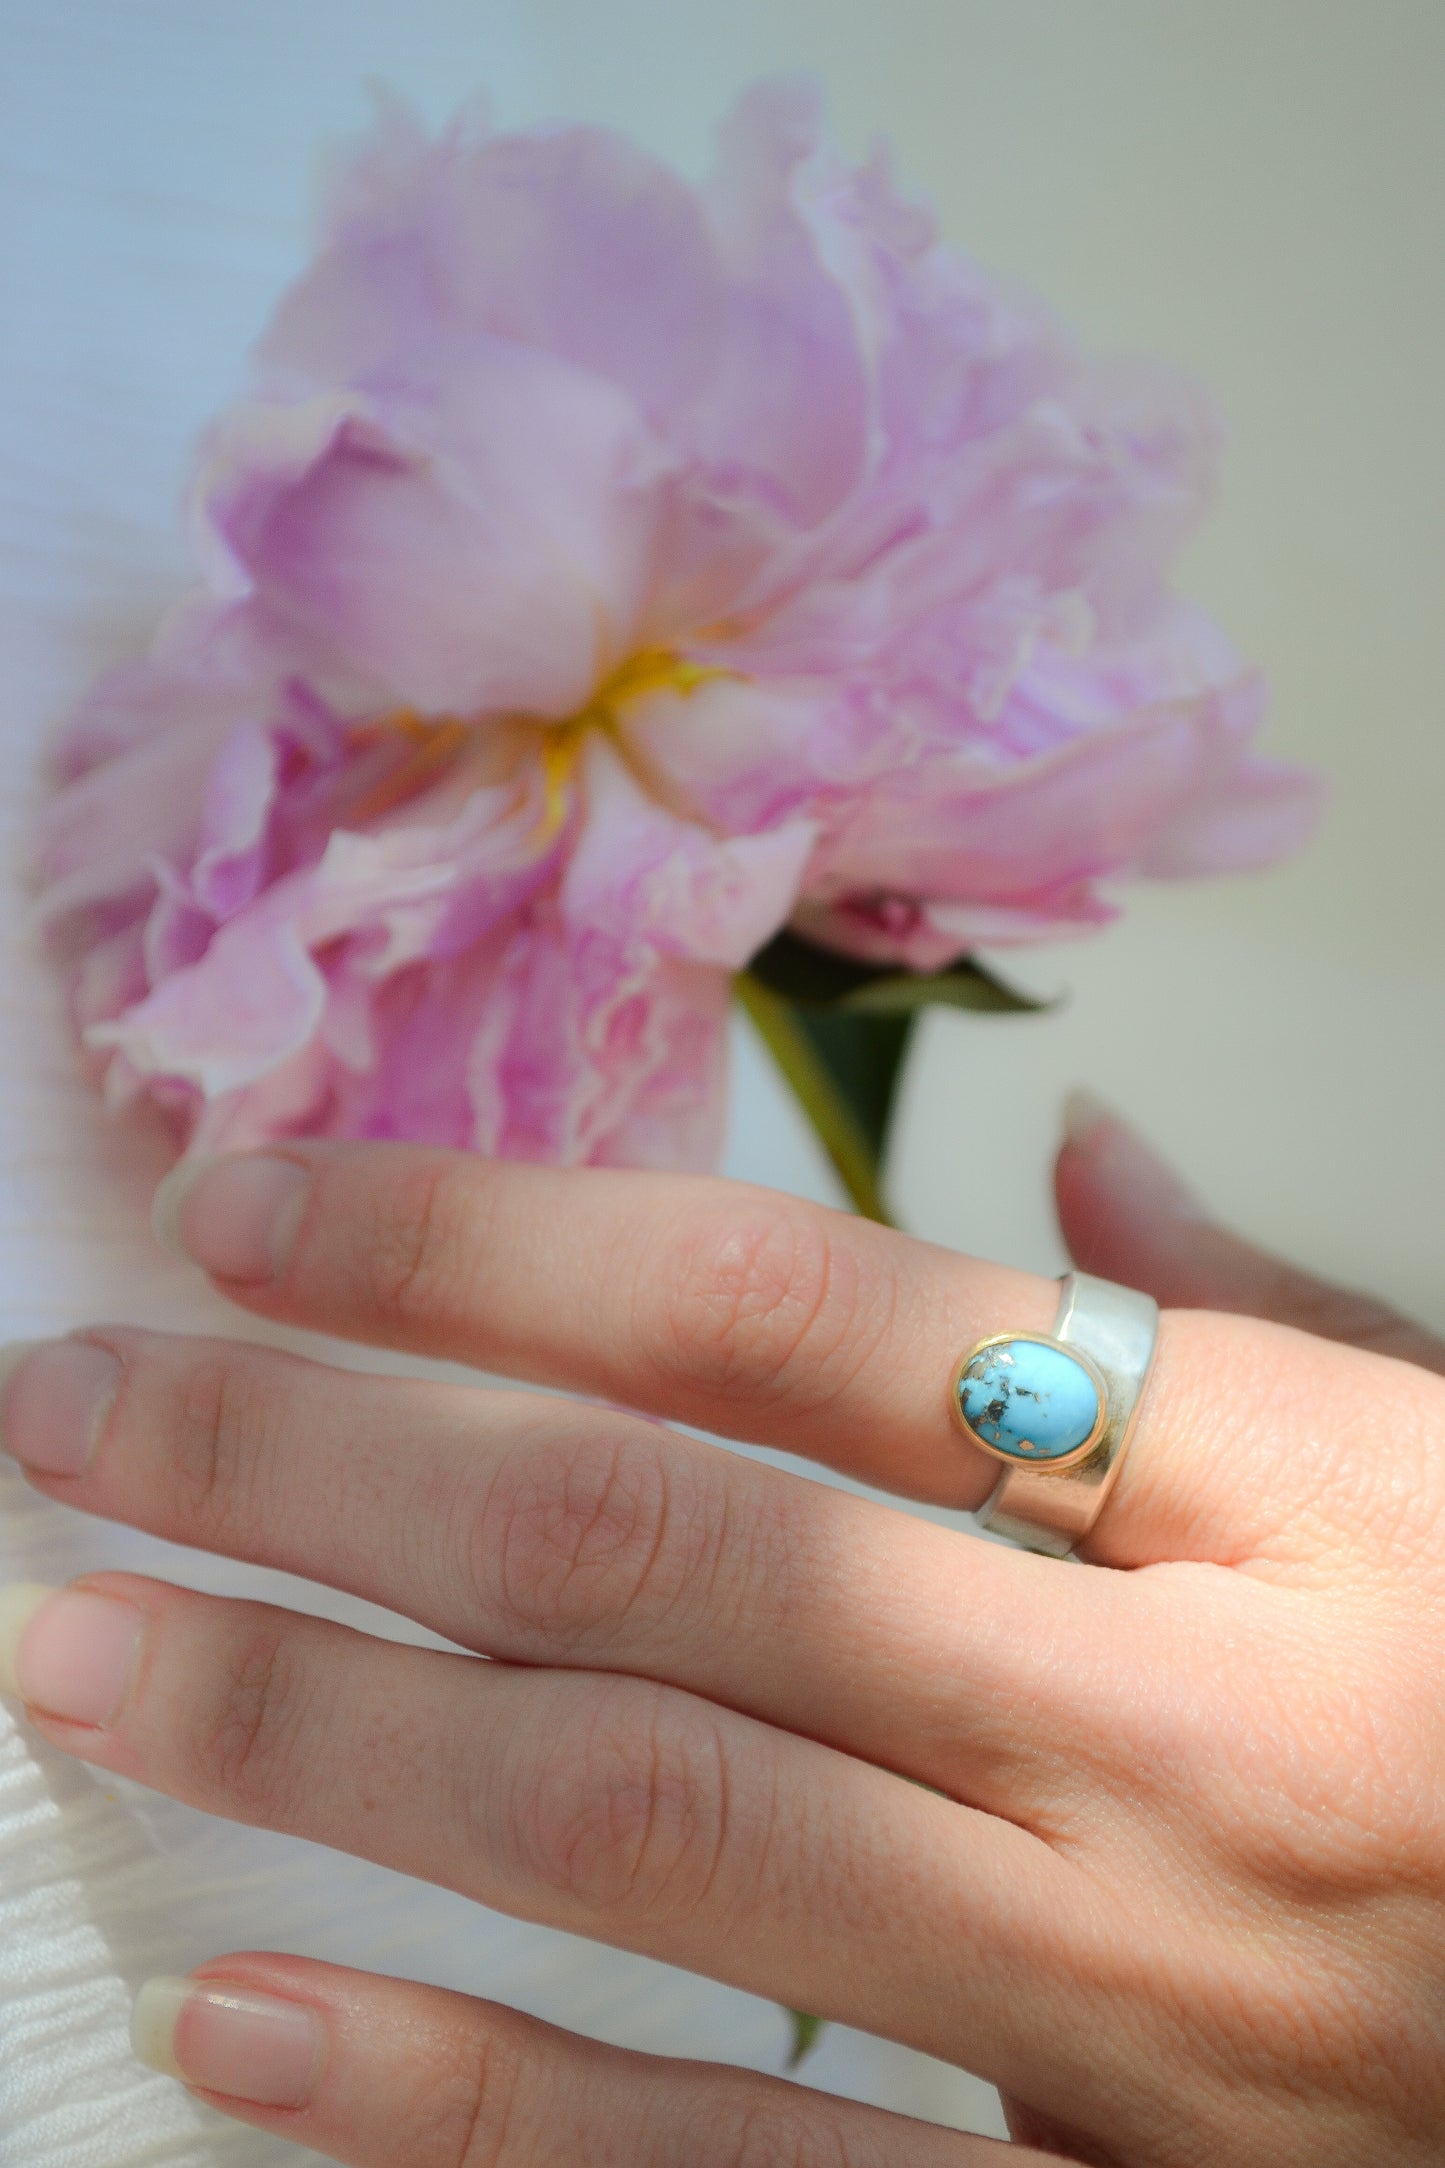 Made by hand in Northern New Mexico using recycled metals and responsibly sourced stones. This ring features a large cabochon Persian Turquoise stone set in a 14k yellow Gold bezel on a wide Sterling Silver band with matte finish. Mesa Ring by Halcyon Jewelry.